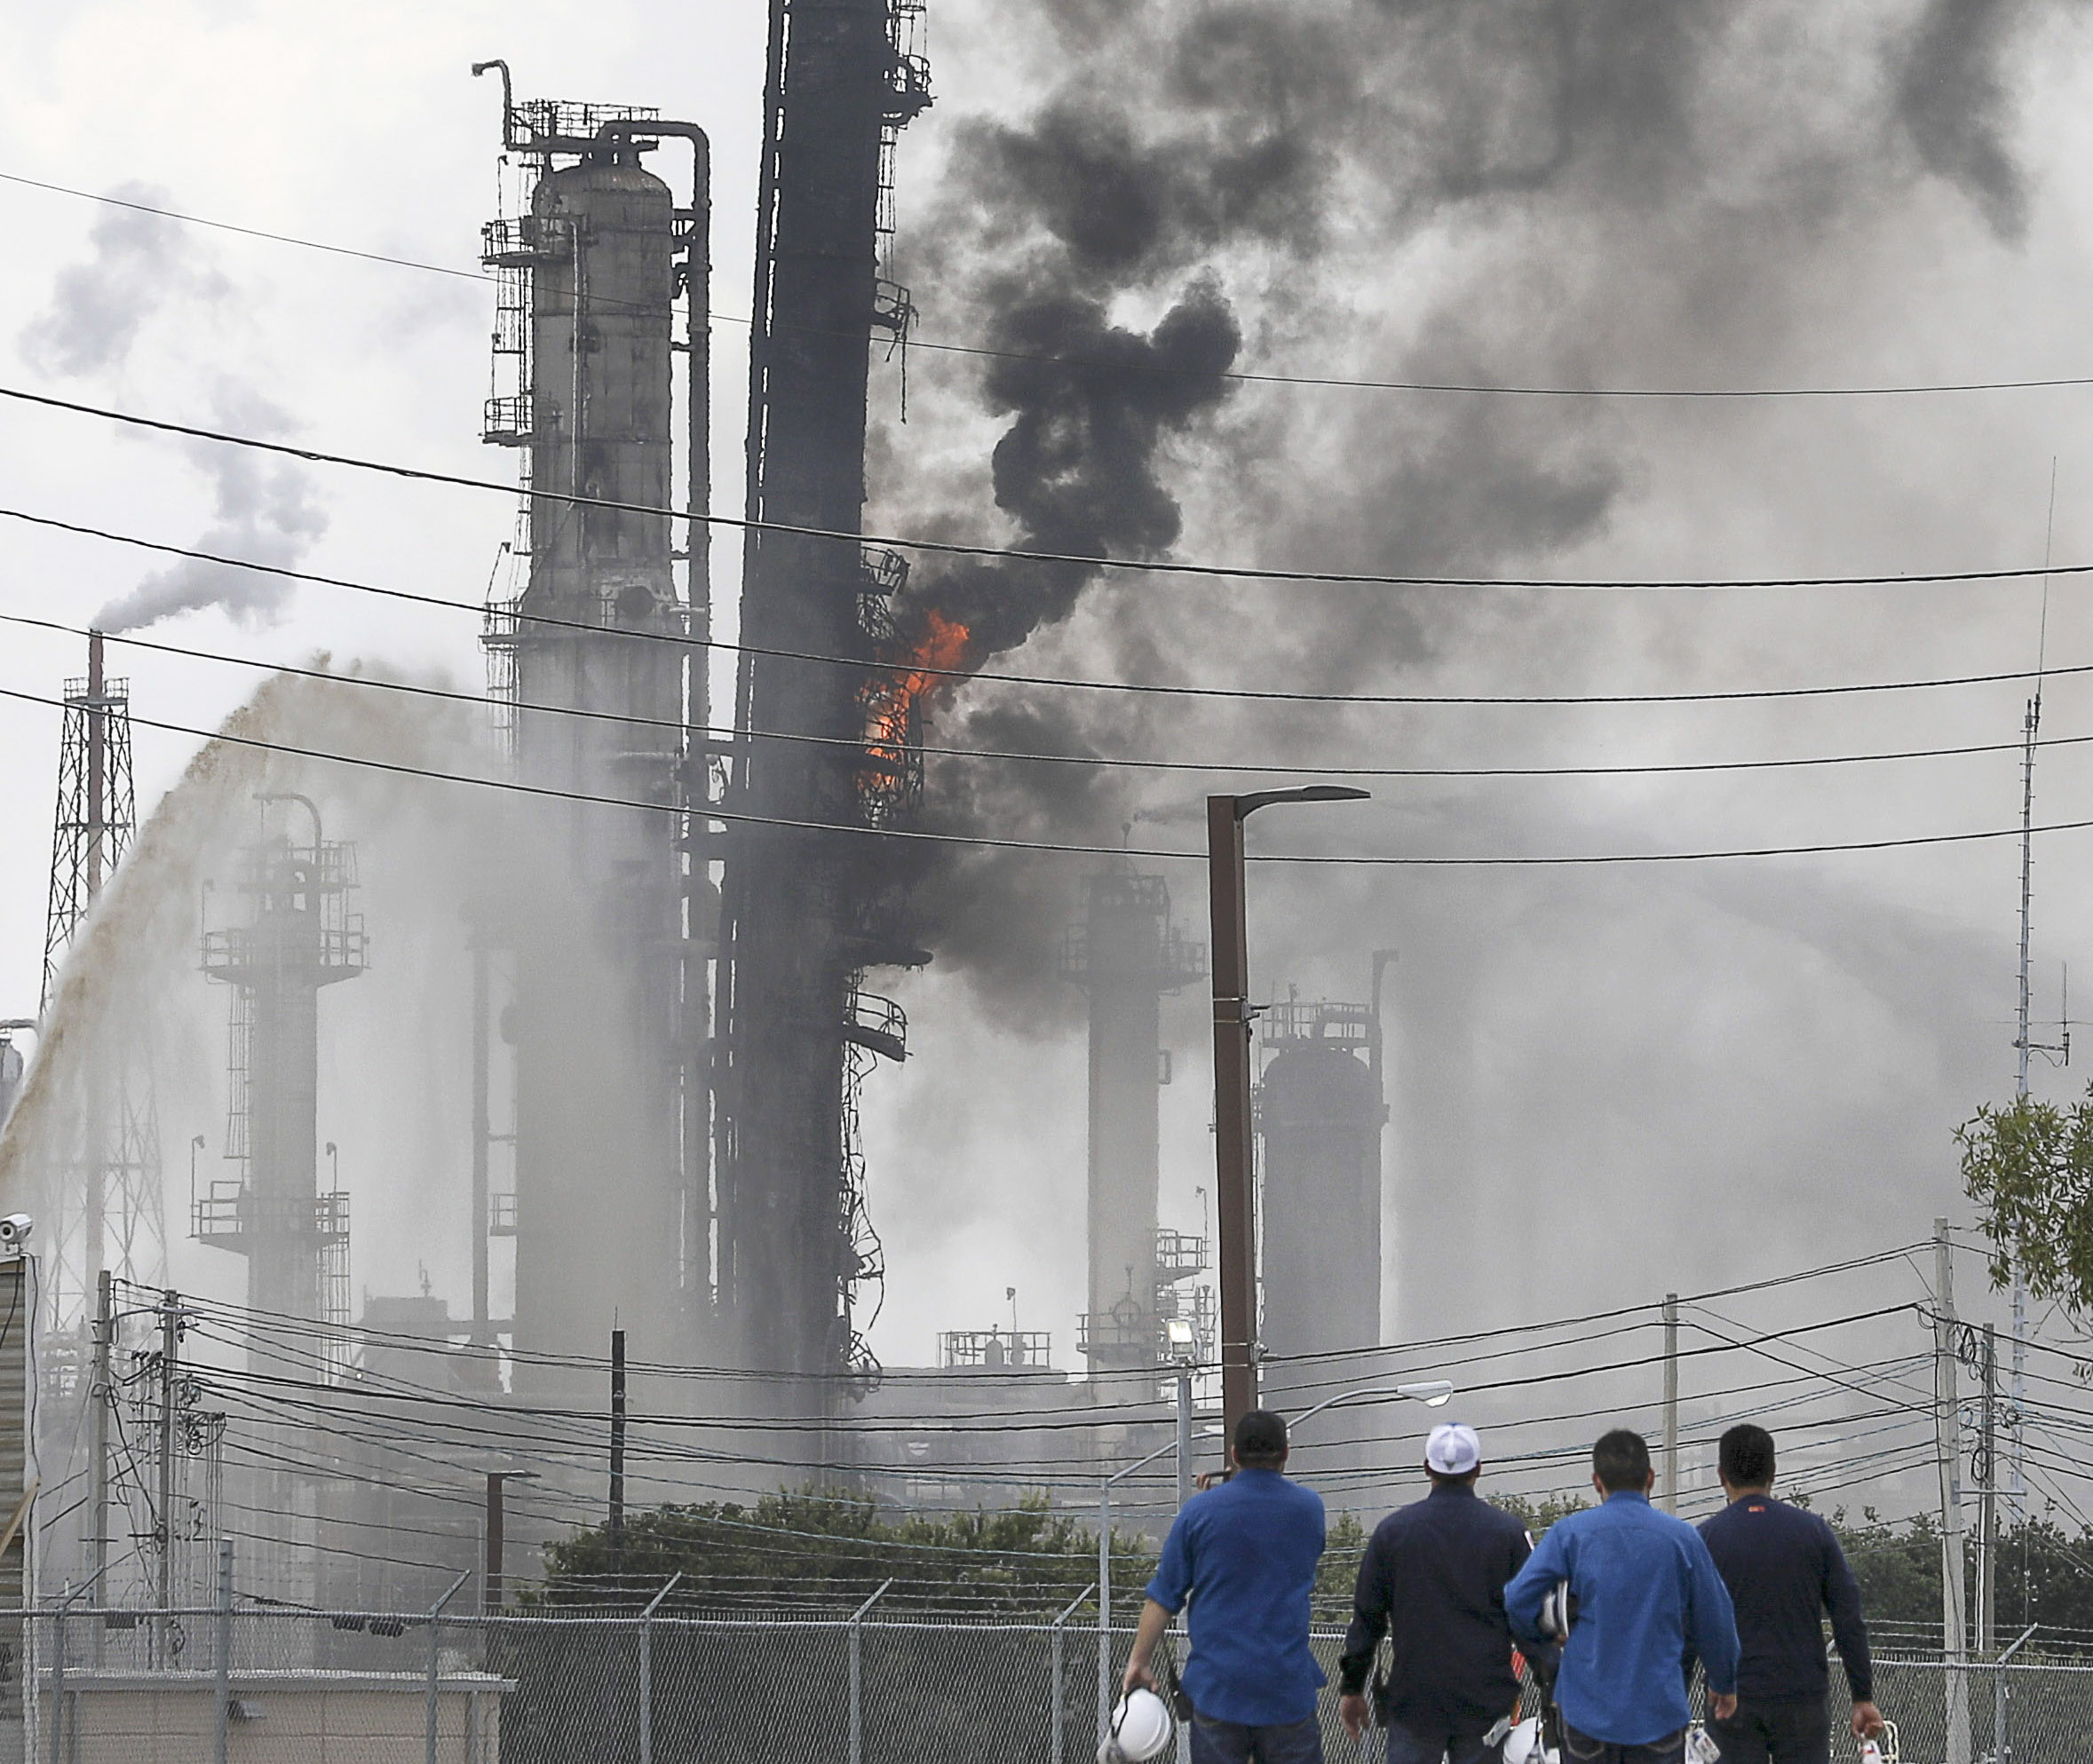 PHOTO: Flames and smoke rise after a fire started at an Exxon Mobil facility, July 31, 2019, in Baytown, Texas.